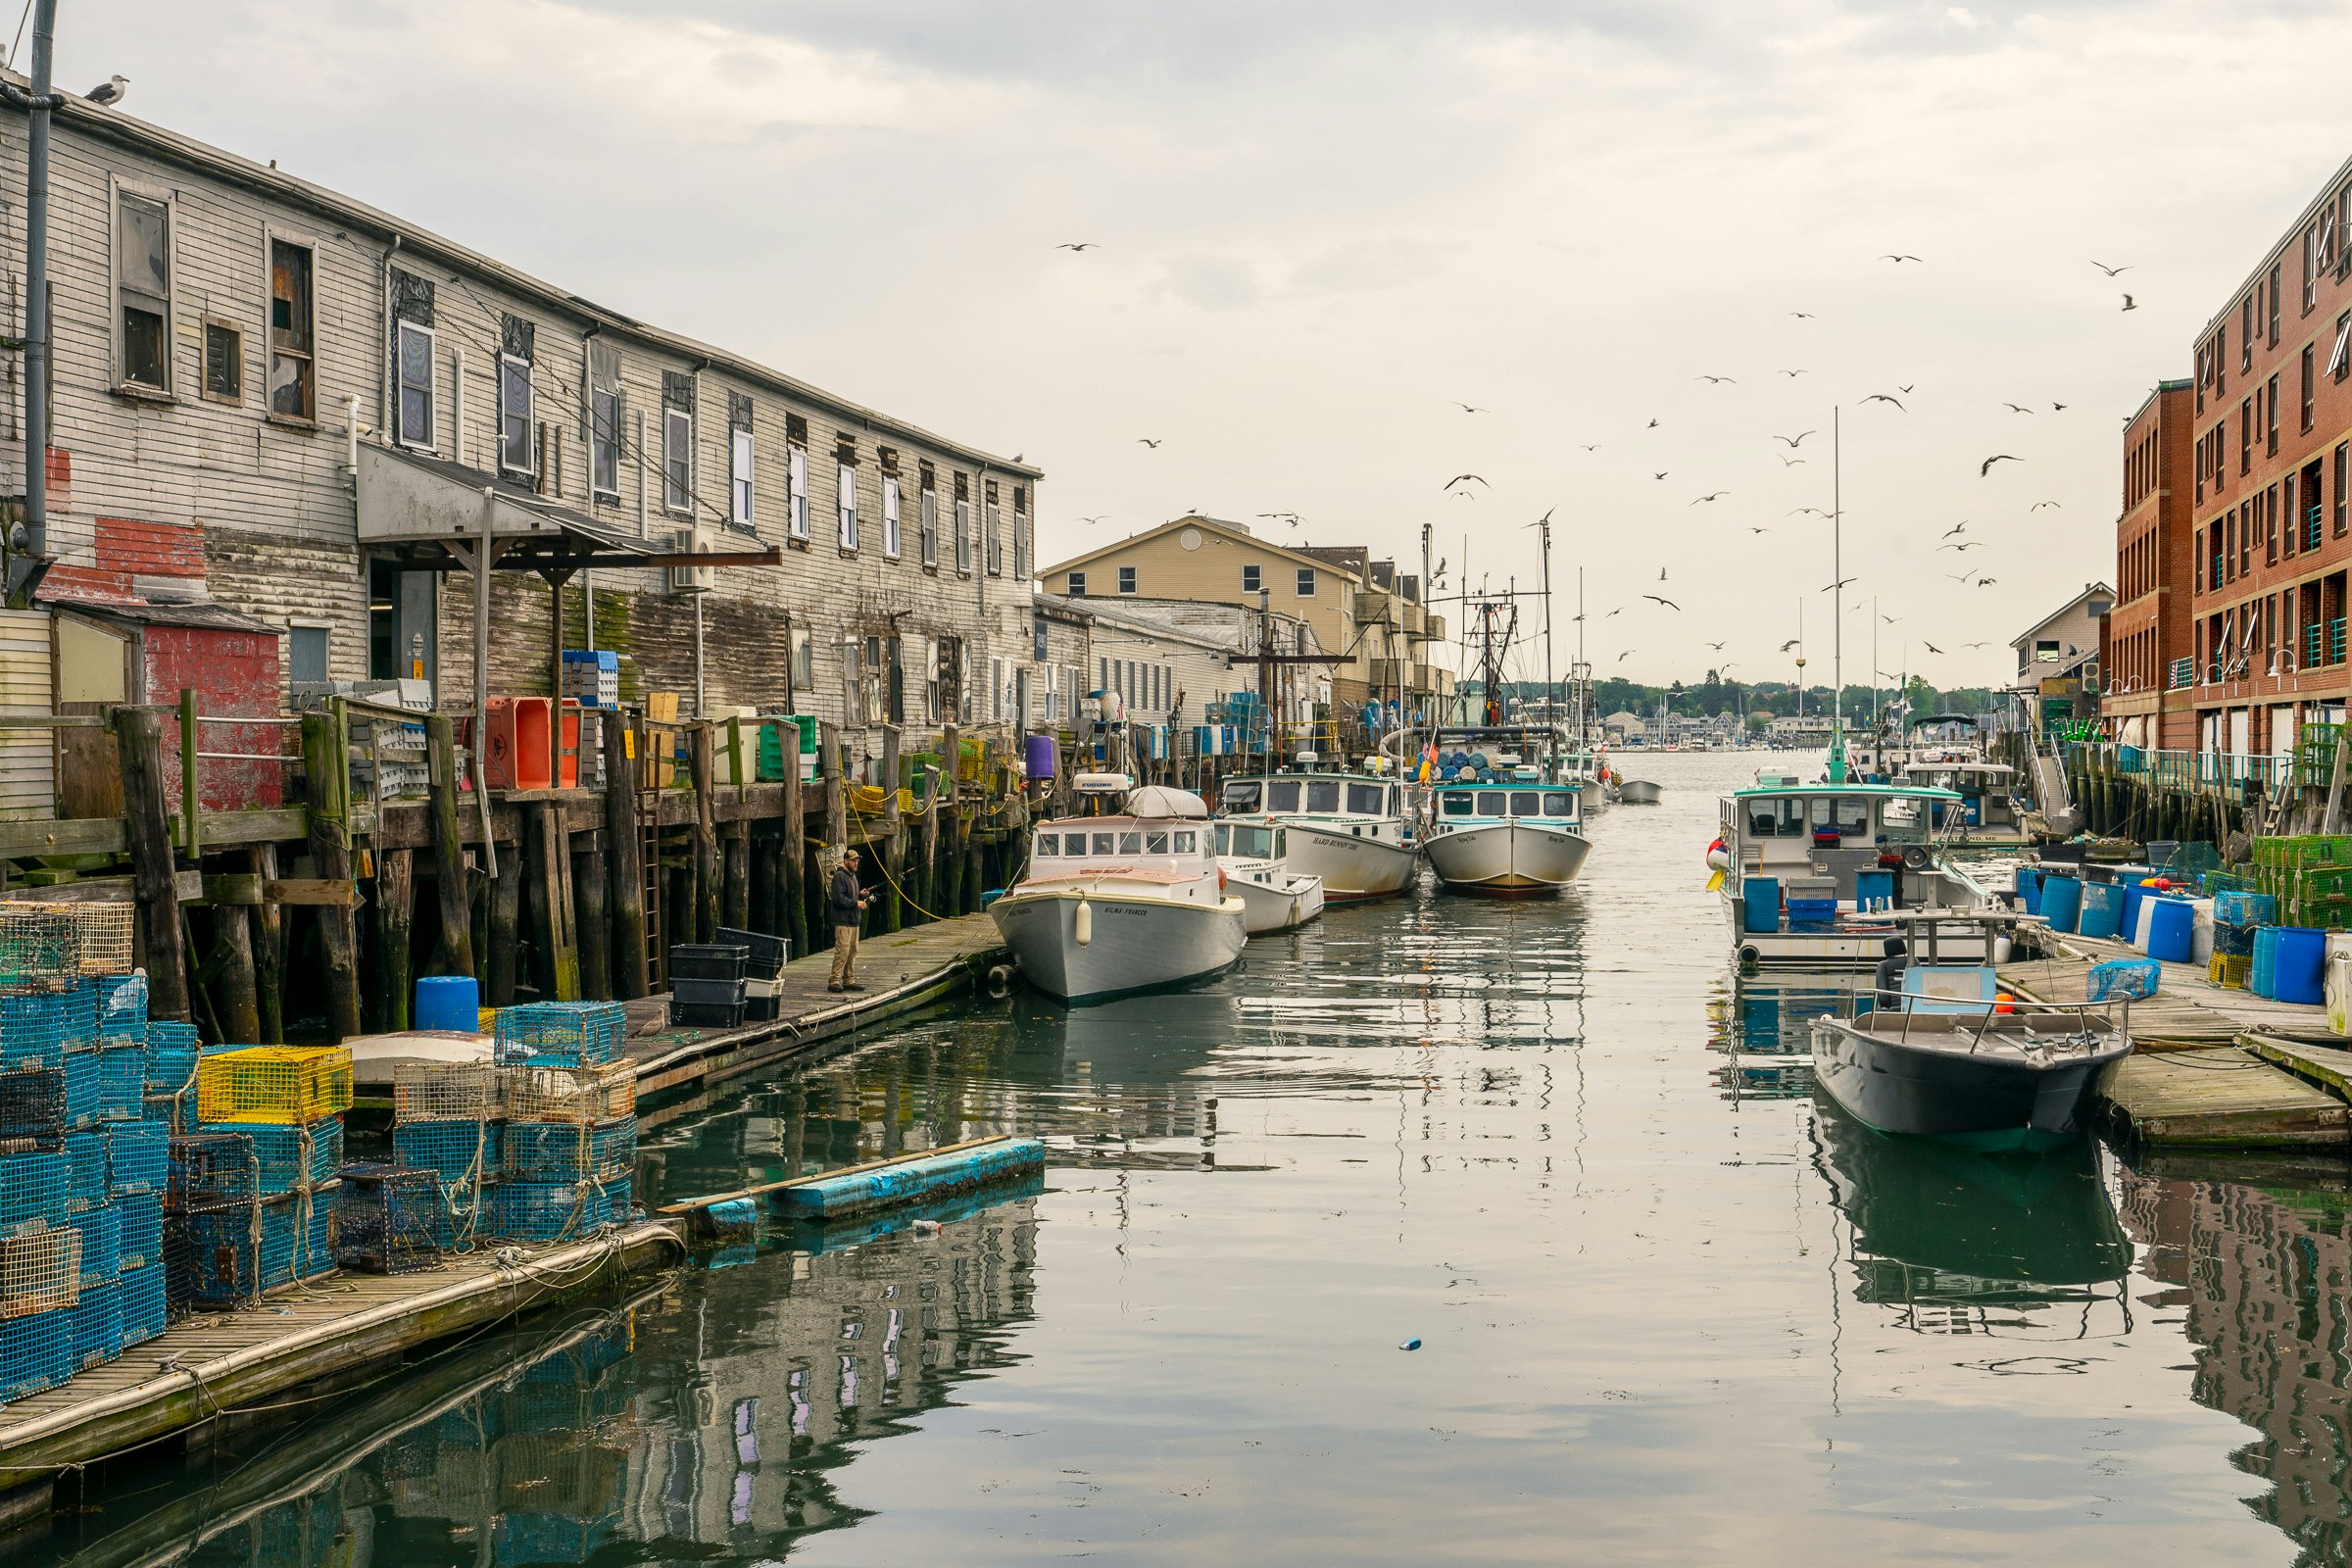 Wooden buildings and lobster traps line the Portland Pier near Luke's Lobster restaurant. Several small fishing boats float on the water as seagulls fly overhead